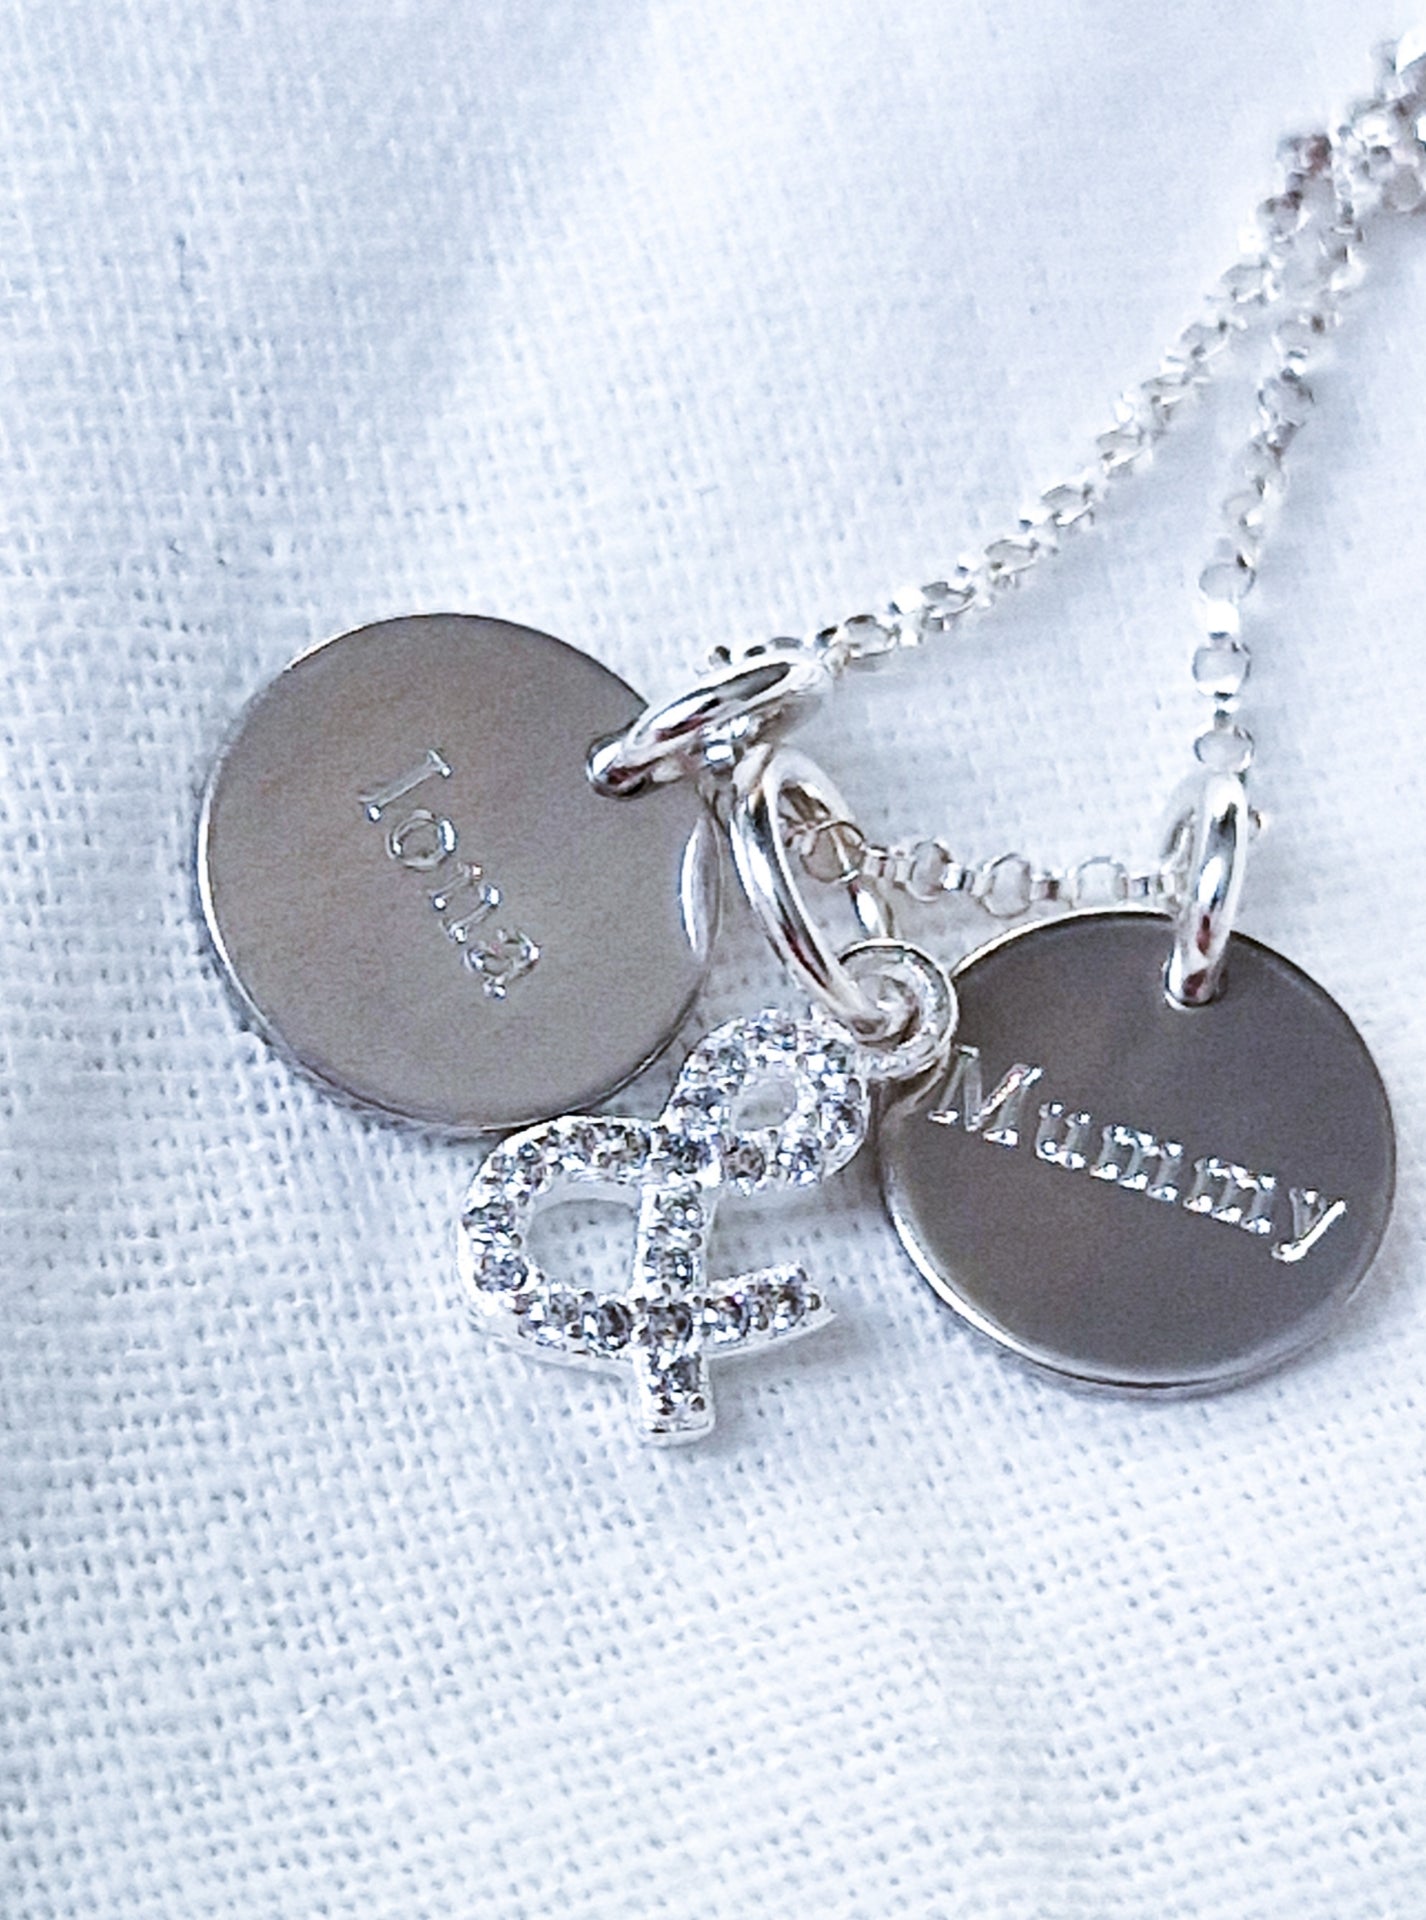 Necklace - Silver Crystal '&' with Two Engraved Discs